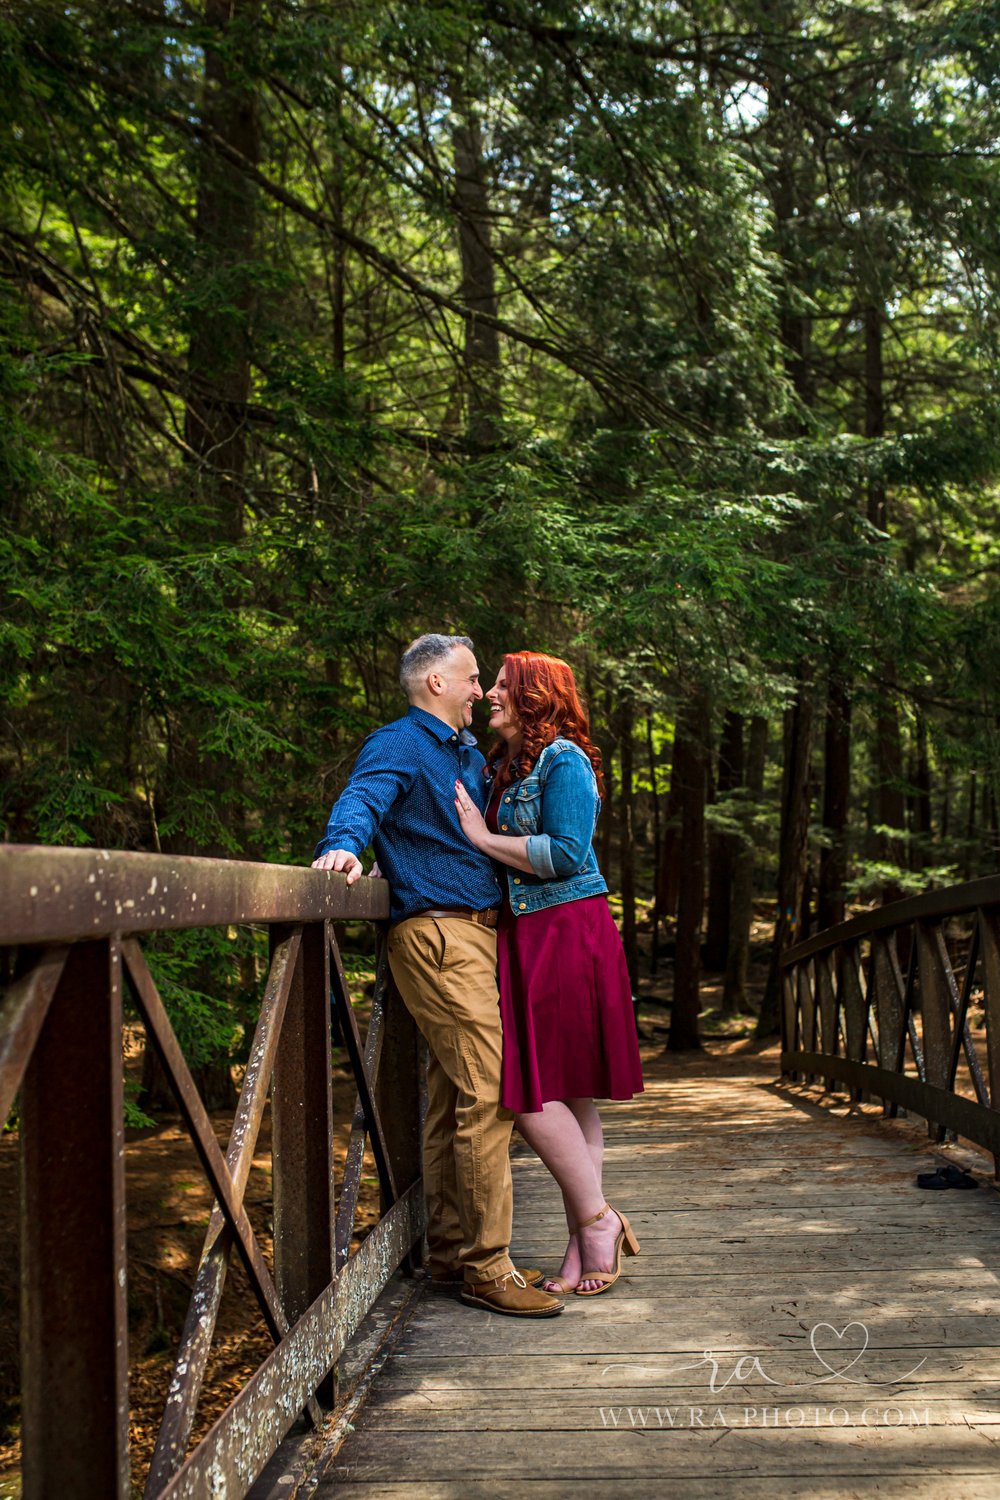 026-KKM-COOK-FOREST-STATE-PARK-PA-ENGAGEMENT-PHOTOS.jpg